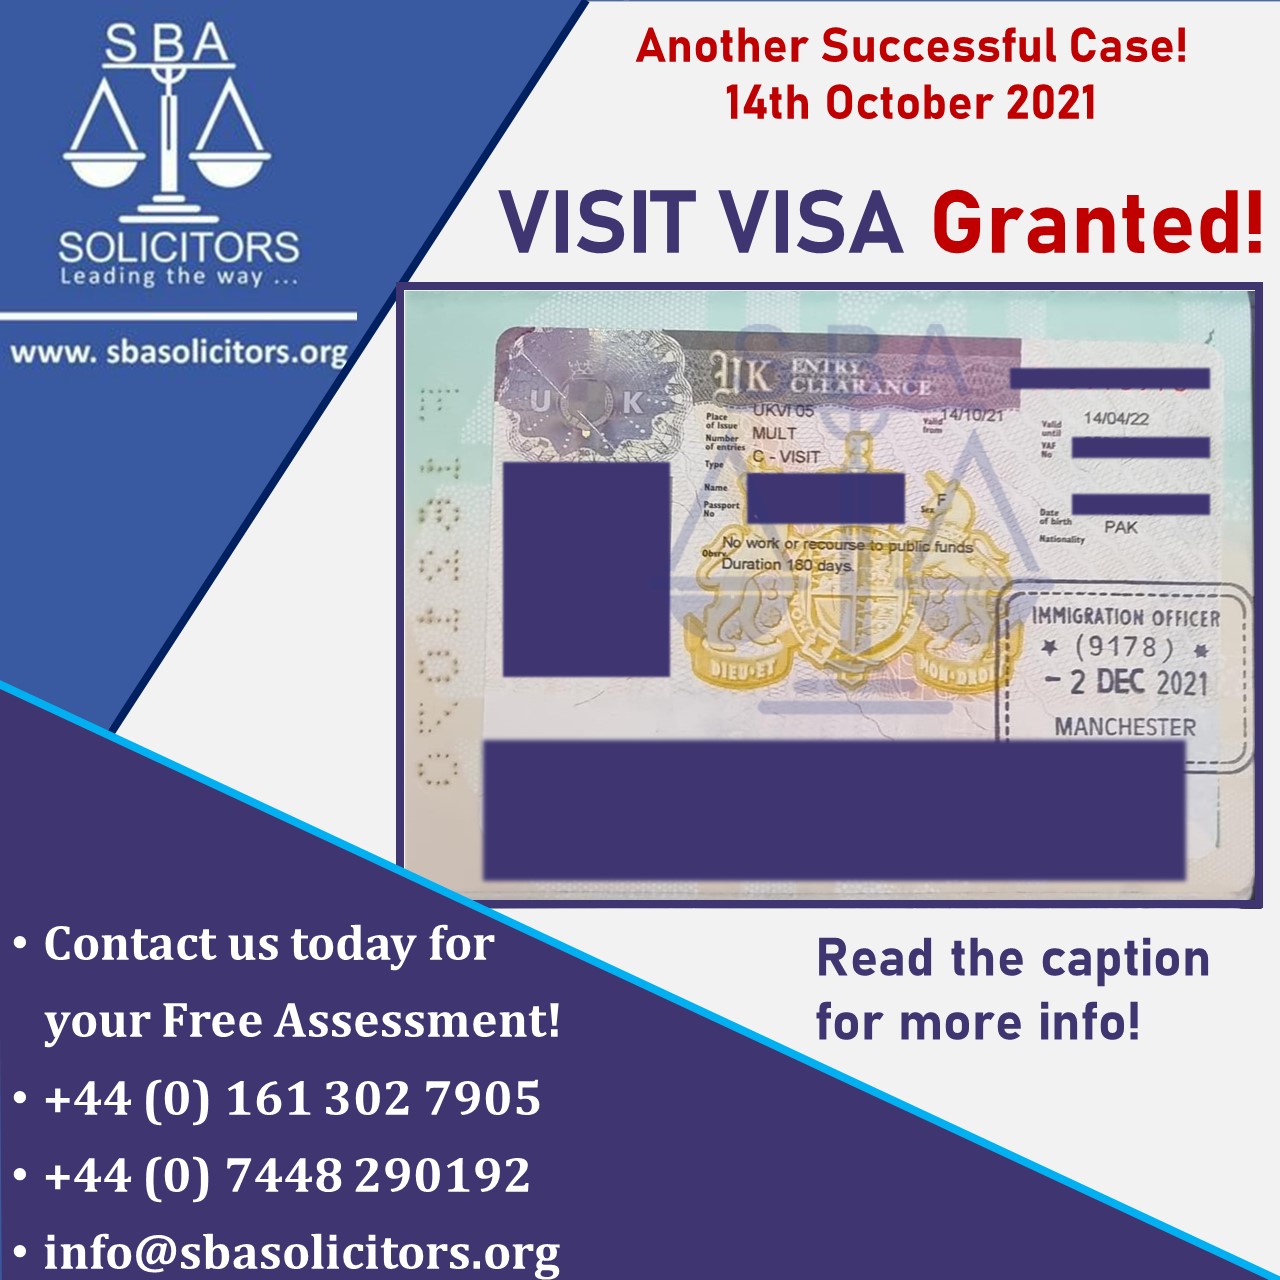 Another Successful case! The client entered the UK on 2nd December! We applied for our client’s visit visa from Pakistan, even with the Covid situation! Our client entered the UK on 2nd December to visit her son and his family! This was her first visit to the UK! She was refused a visit visa before she came to SBA Solicitors, However, we made it possible for her to visit her son! Here is what we did: – Consulted the client – Advised on the necessary document for visit visa – Advised on the financial requirements – Prepared their file – Filled their online application – Scanned and Uploaded all her documents – Booked her appointment – Chased the Home Office for the decision She received her visa on 14th October and entered the UK on 2nd December! She can stay for 6 months and can enter the UK multiple times! Do you want to visit your family in the UK? Do you want to call someone to the UK for a visit? Just give us a call and we will get it sorted for you! Contact us today for your free assessment! +44 (0)161 302 7905 +44 (0) 7448 290192 ‏Info@sbasolicitos.org ‏Www.sbasolicitors.org